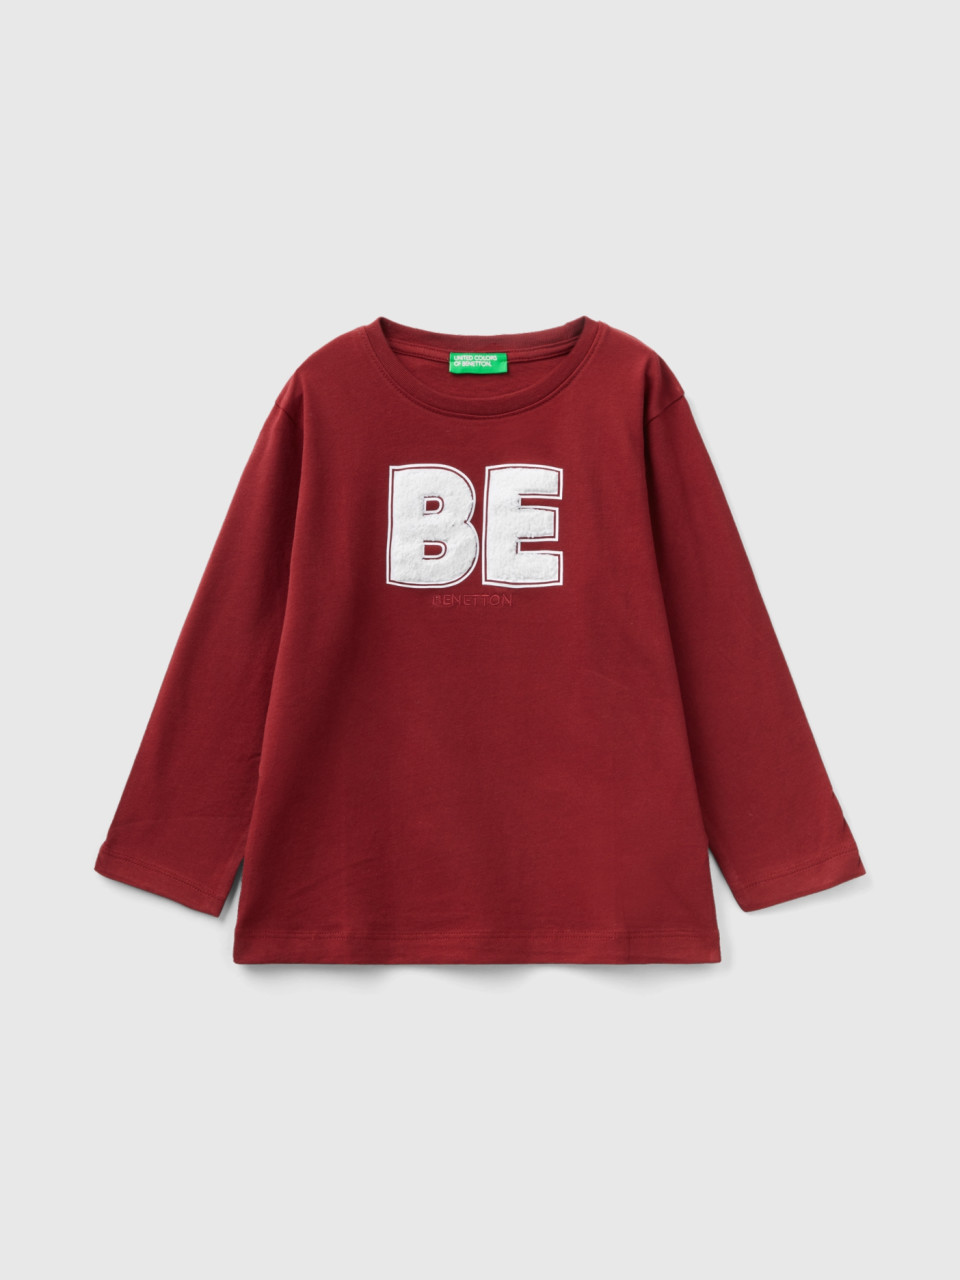 Benetton, T-shirt With Terry Embroidery, Burgundy, Kids